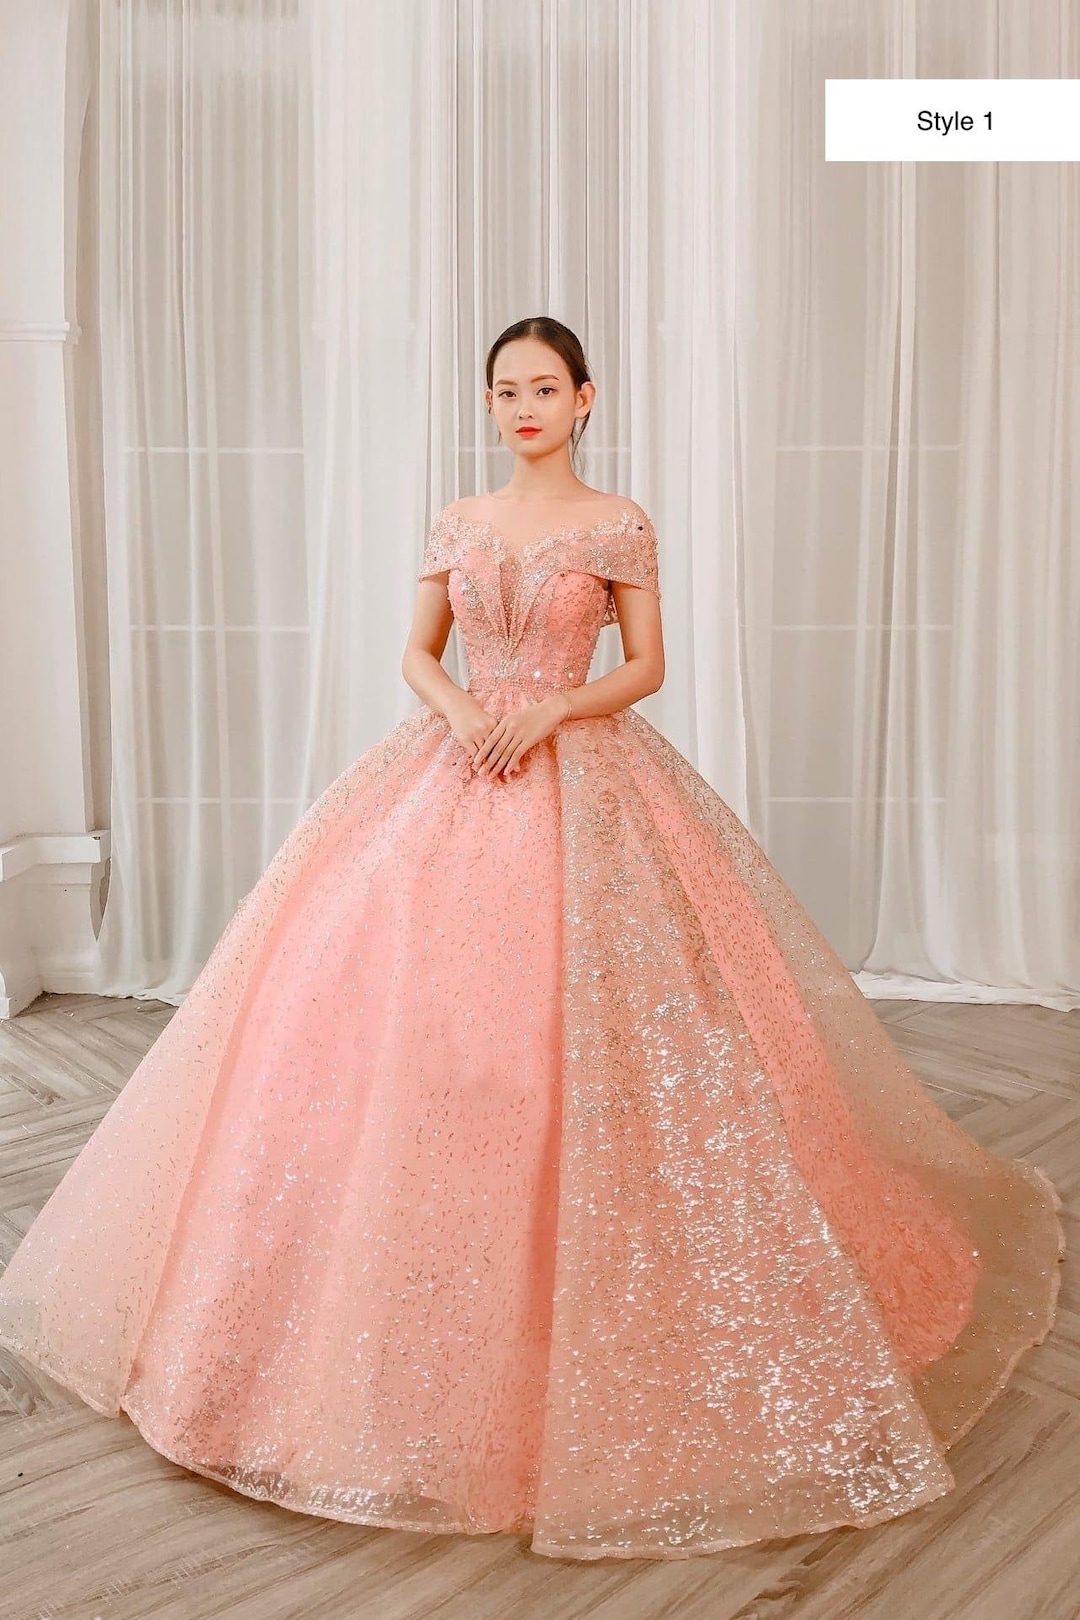 Prom Dress Inspo: Oh Polly Dresses for Fashionable Prom-goers | TikTok